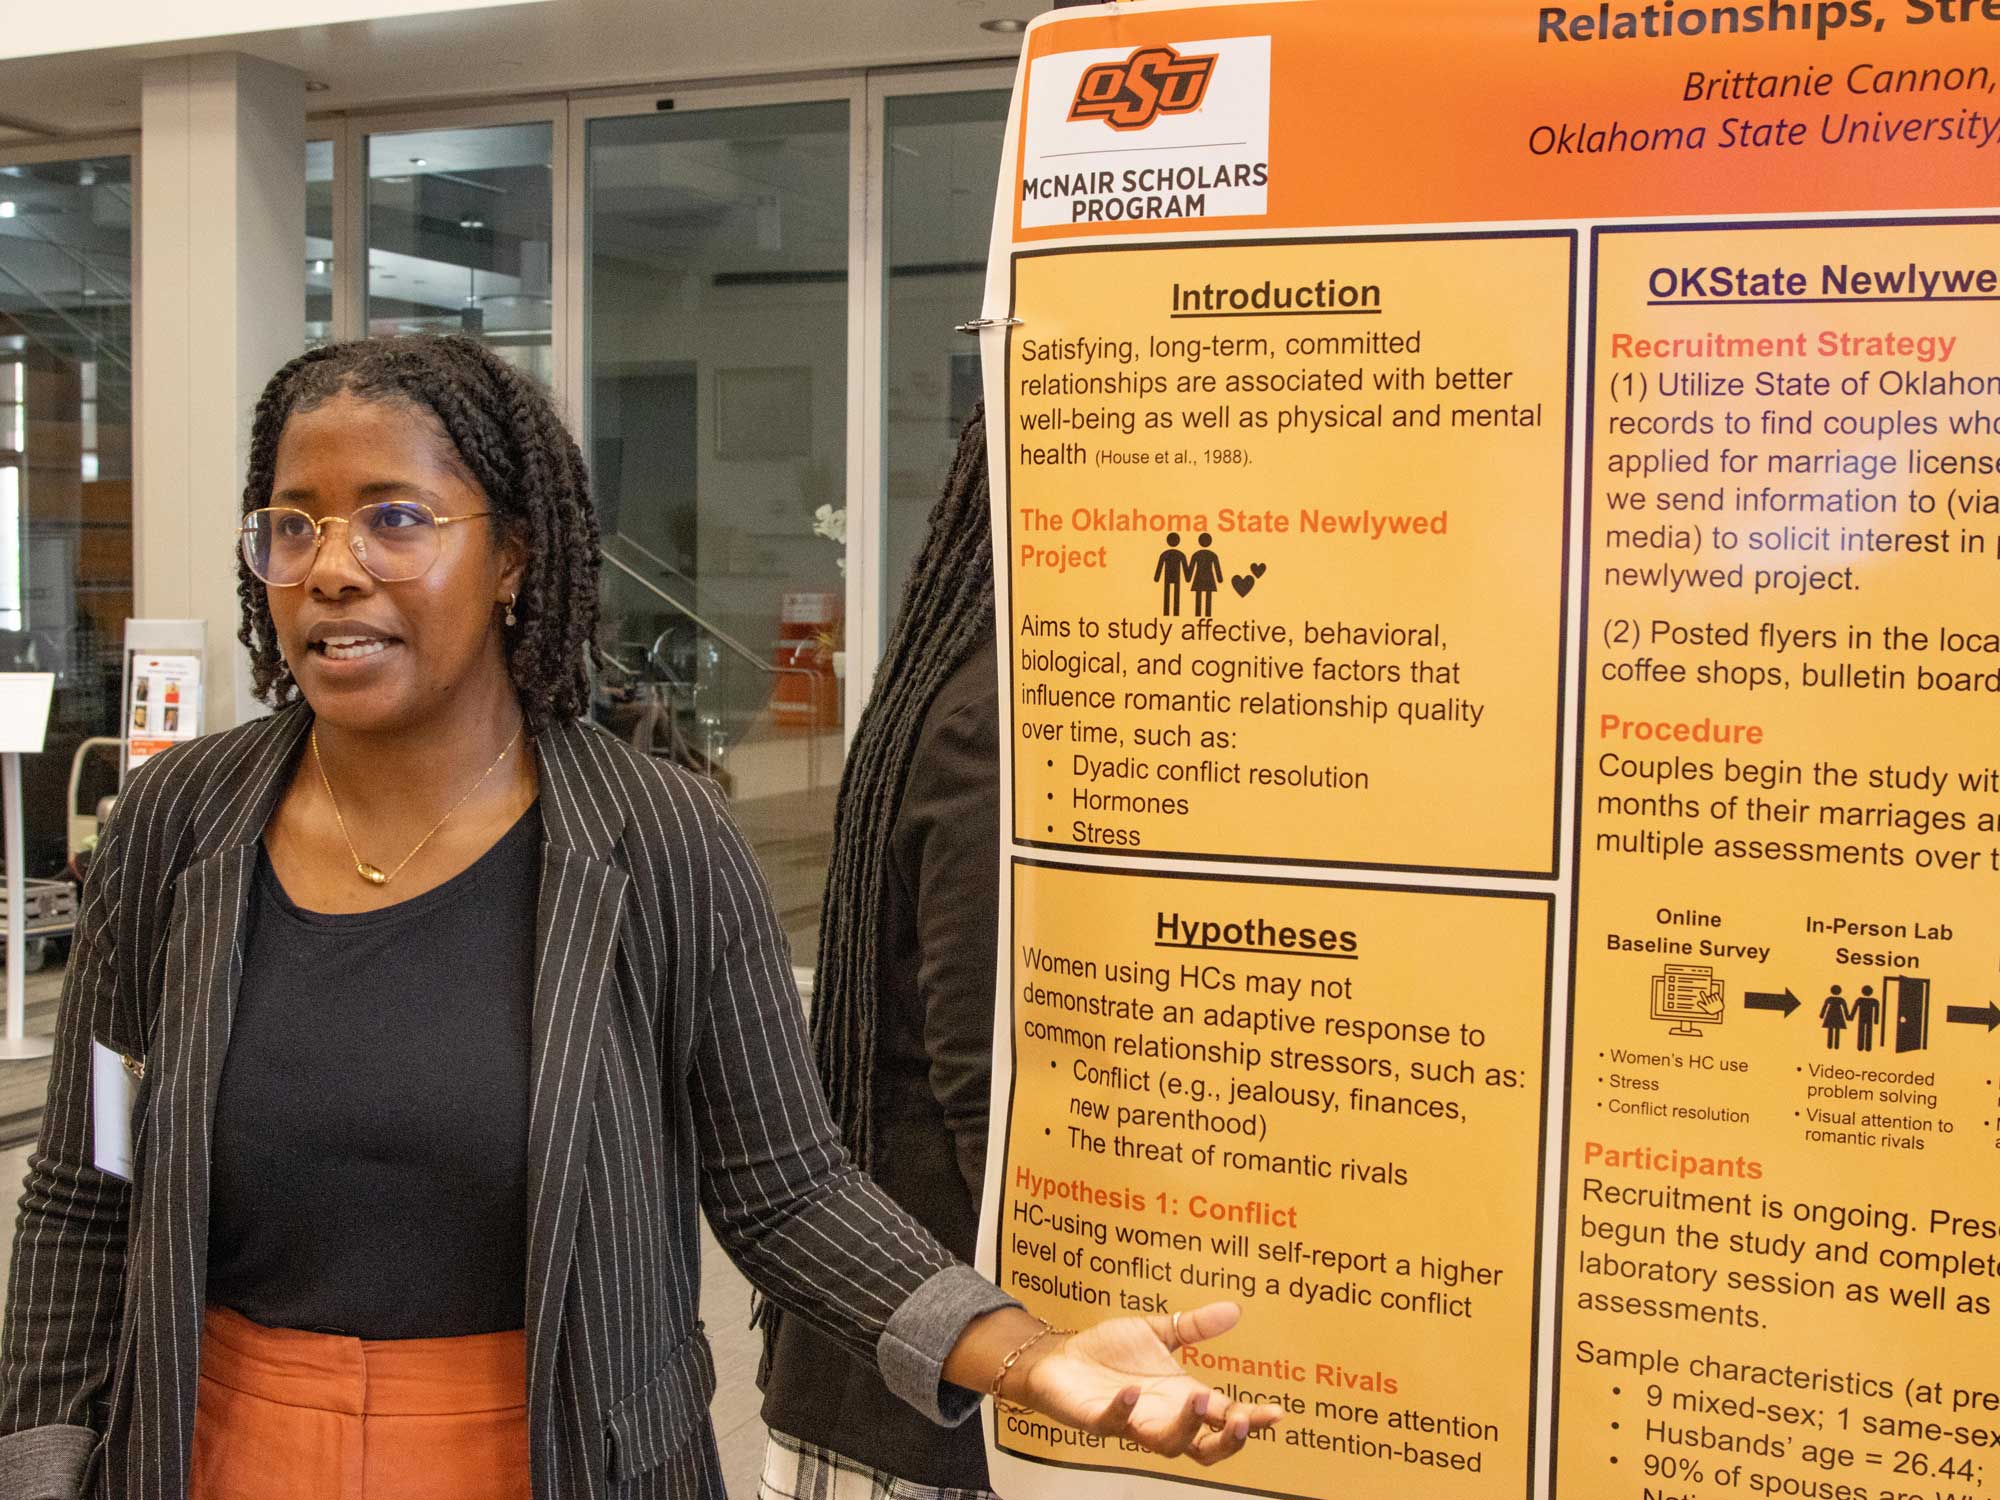 Brittanie Cannon presented her project on relationships, stress and how they impact well being.